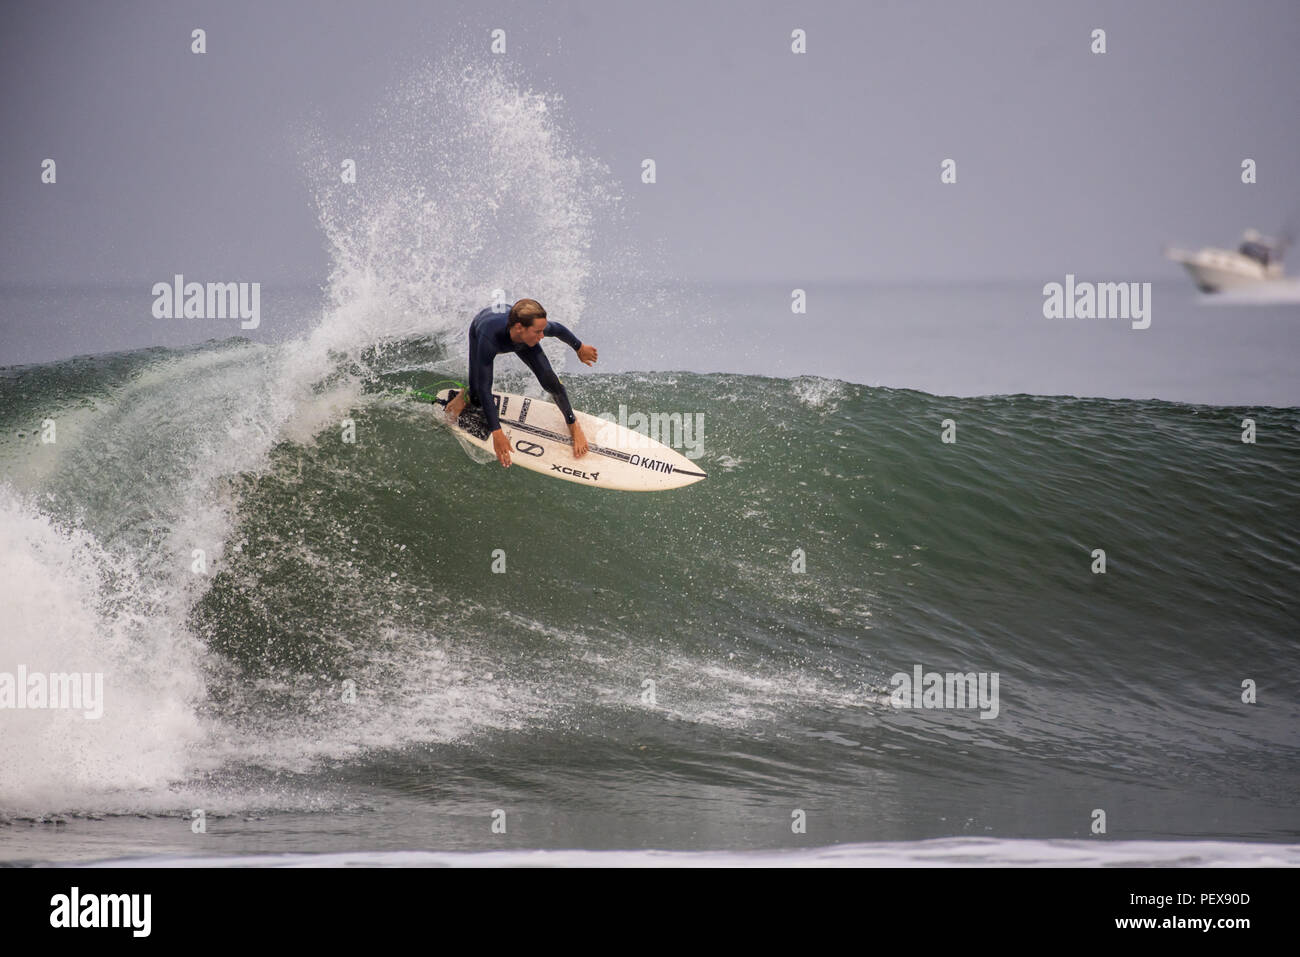 Surfer dropping from the lip on wave pushed into Ventura by Hurricane Lane at Surfer's Knoll Beach in California on August 17, 2018. Stock Photo